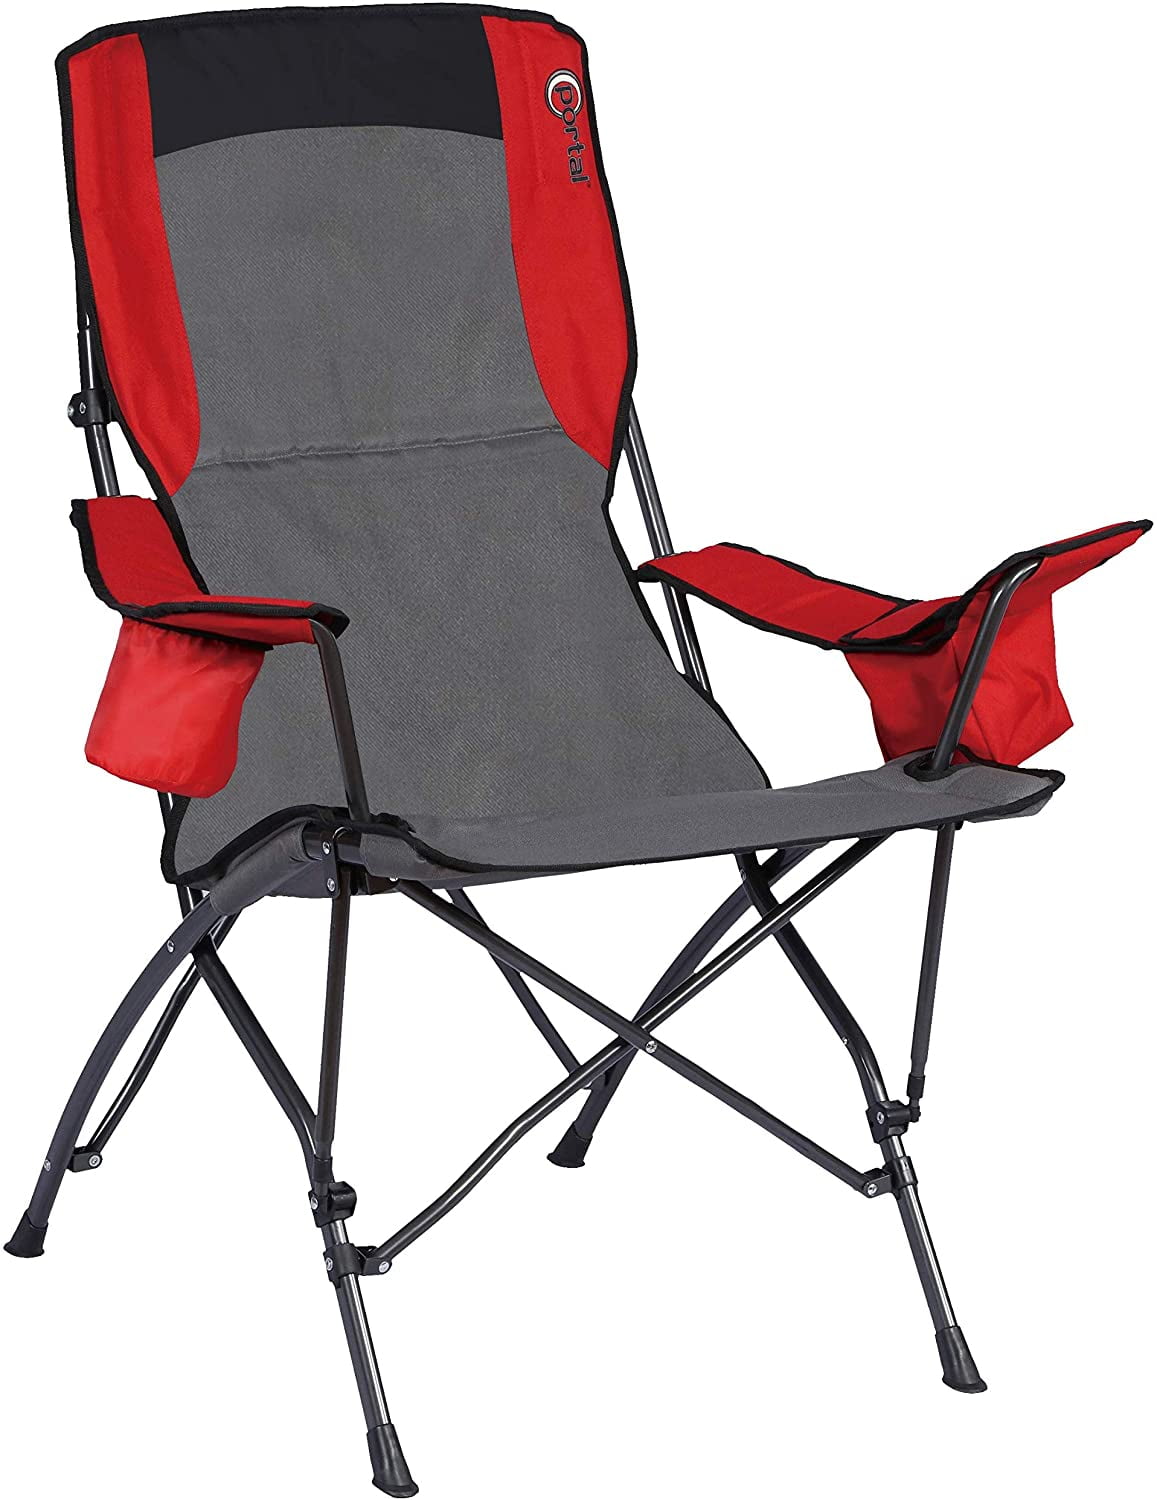 Portal High Back Camping Chair Folding Portable Quad Oversized Arm